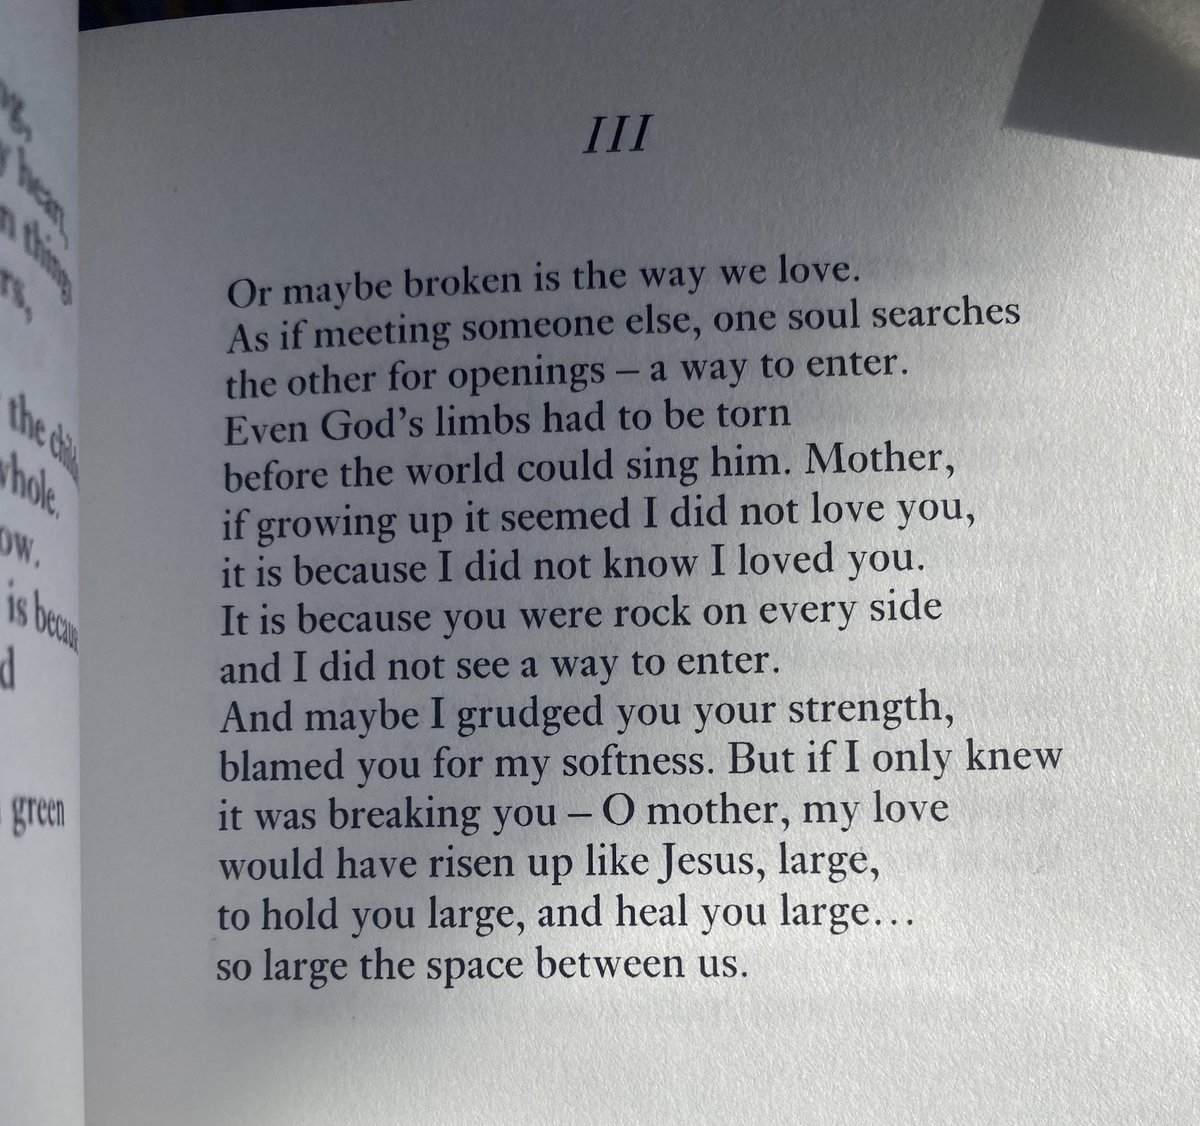 Or maybe broken is the way we love. As if meeting someone else, one soul searches the other for openings - a way to enter. Even God’s limbs had to be torn before the world could sing him. — Kei Miller